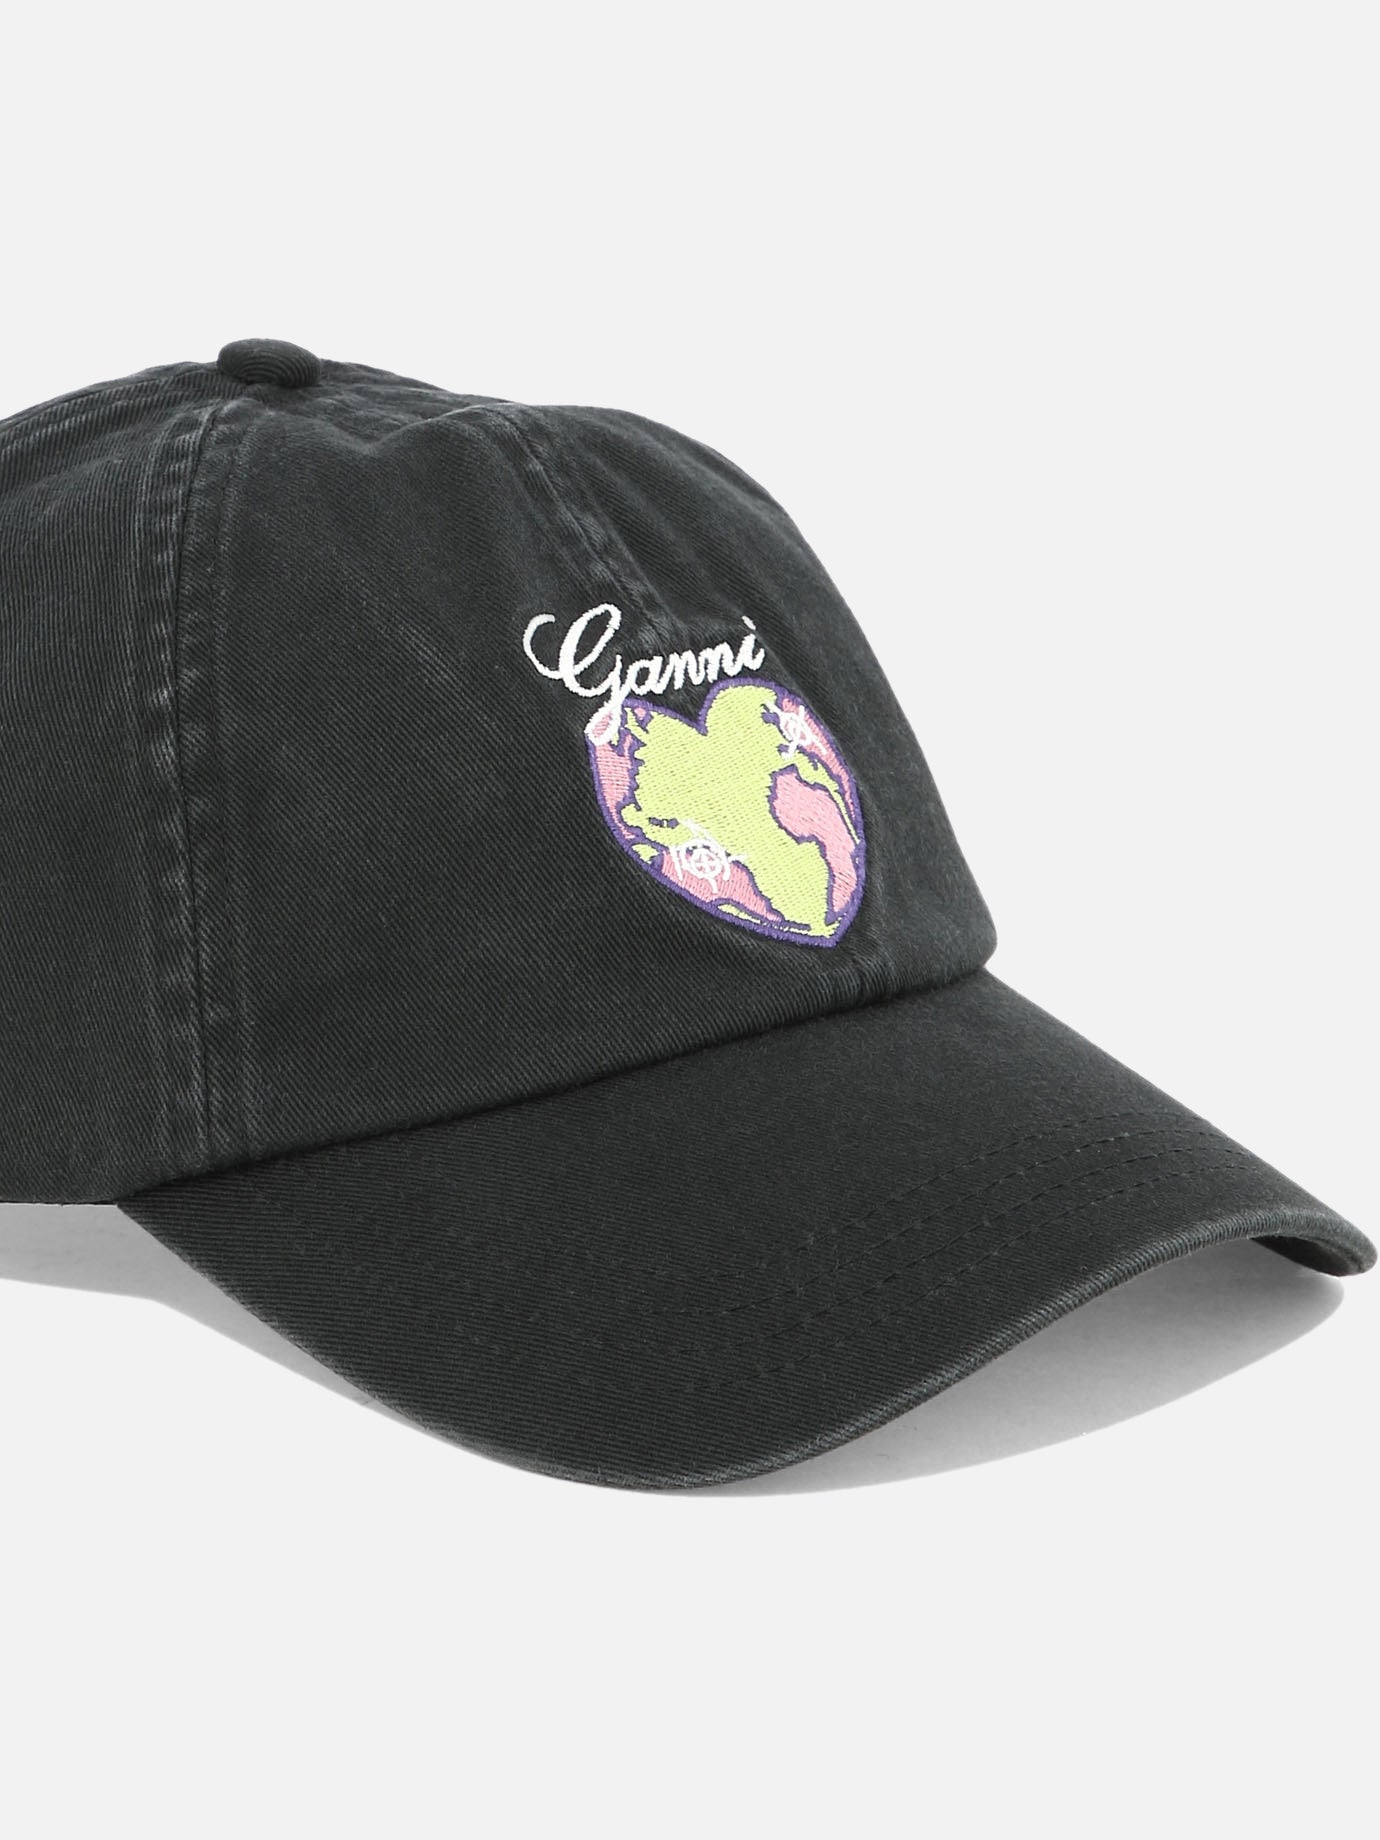 Cap with graphic embroidery